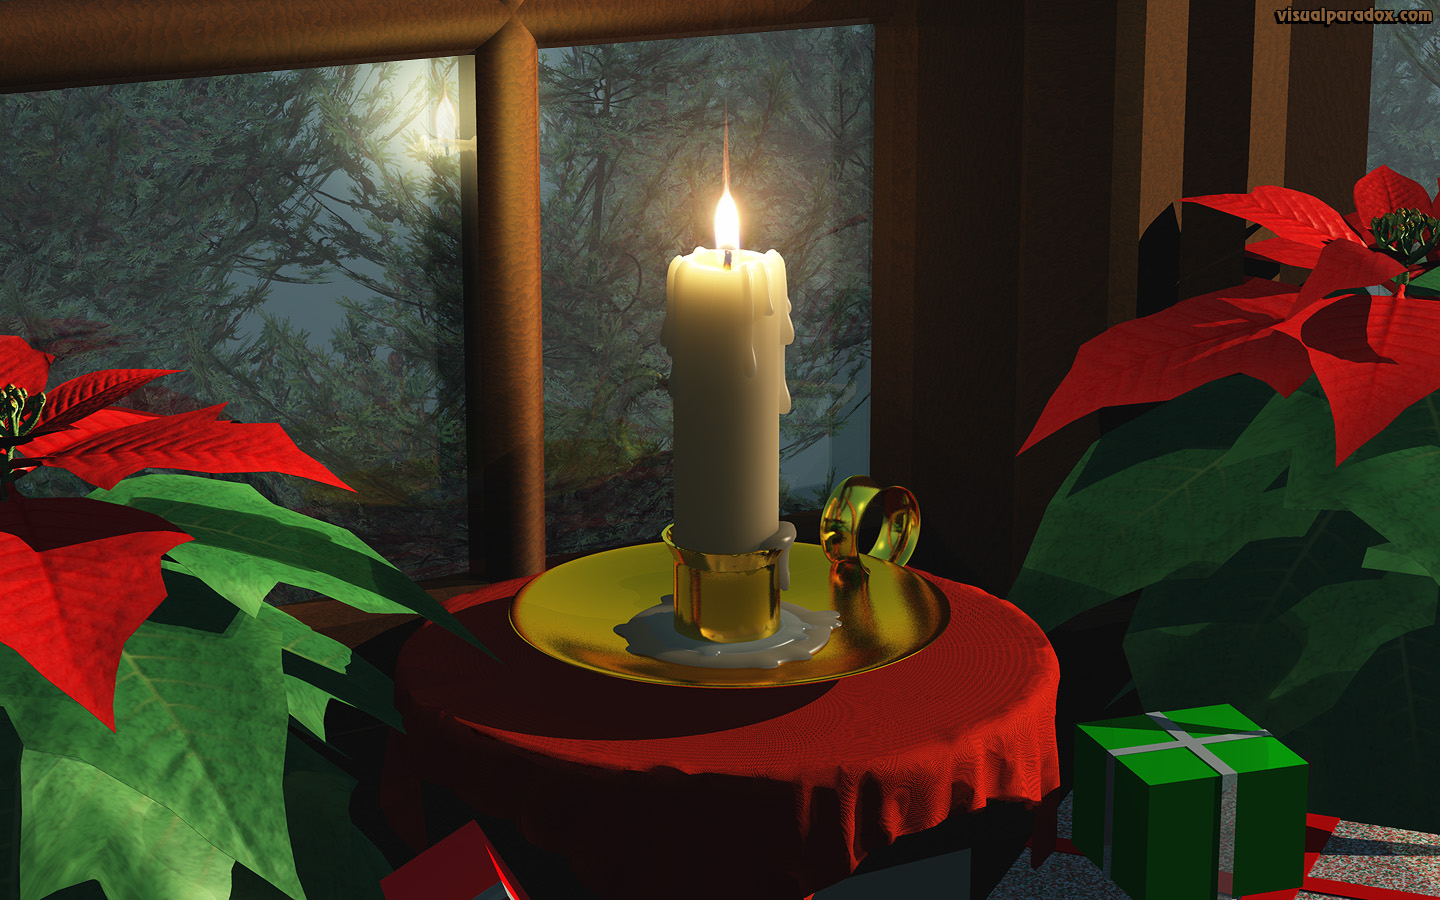 Free 3D Wallpaper 'Candle In The Window' 1440x900 Wide Screen